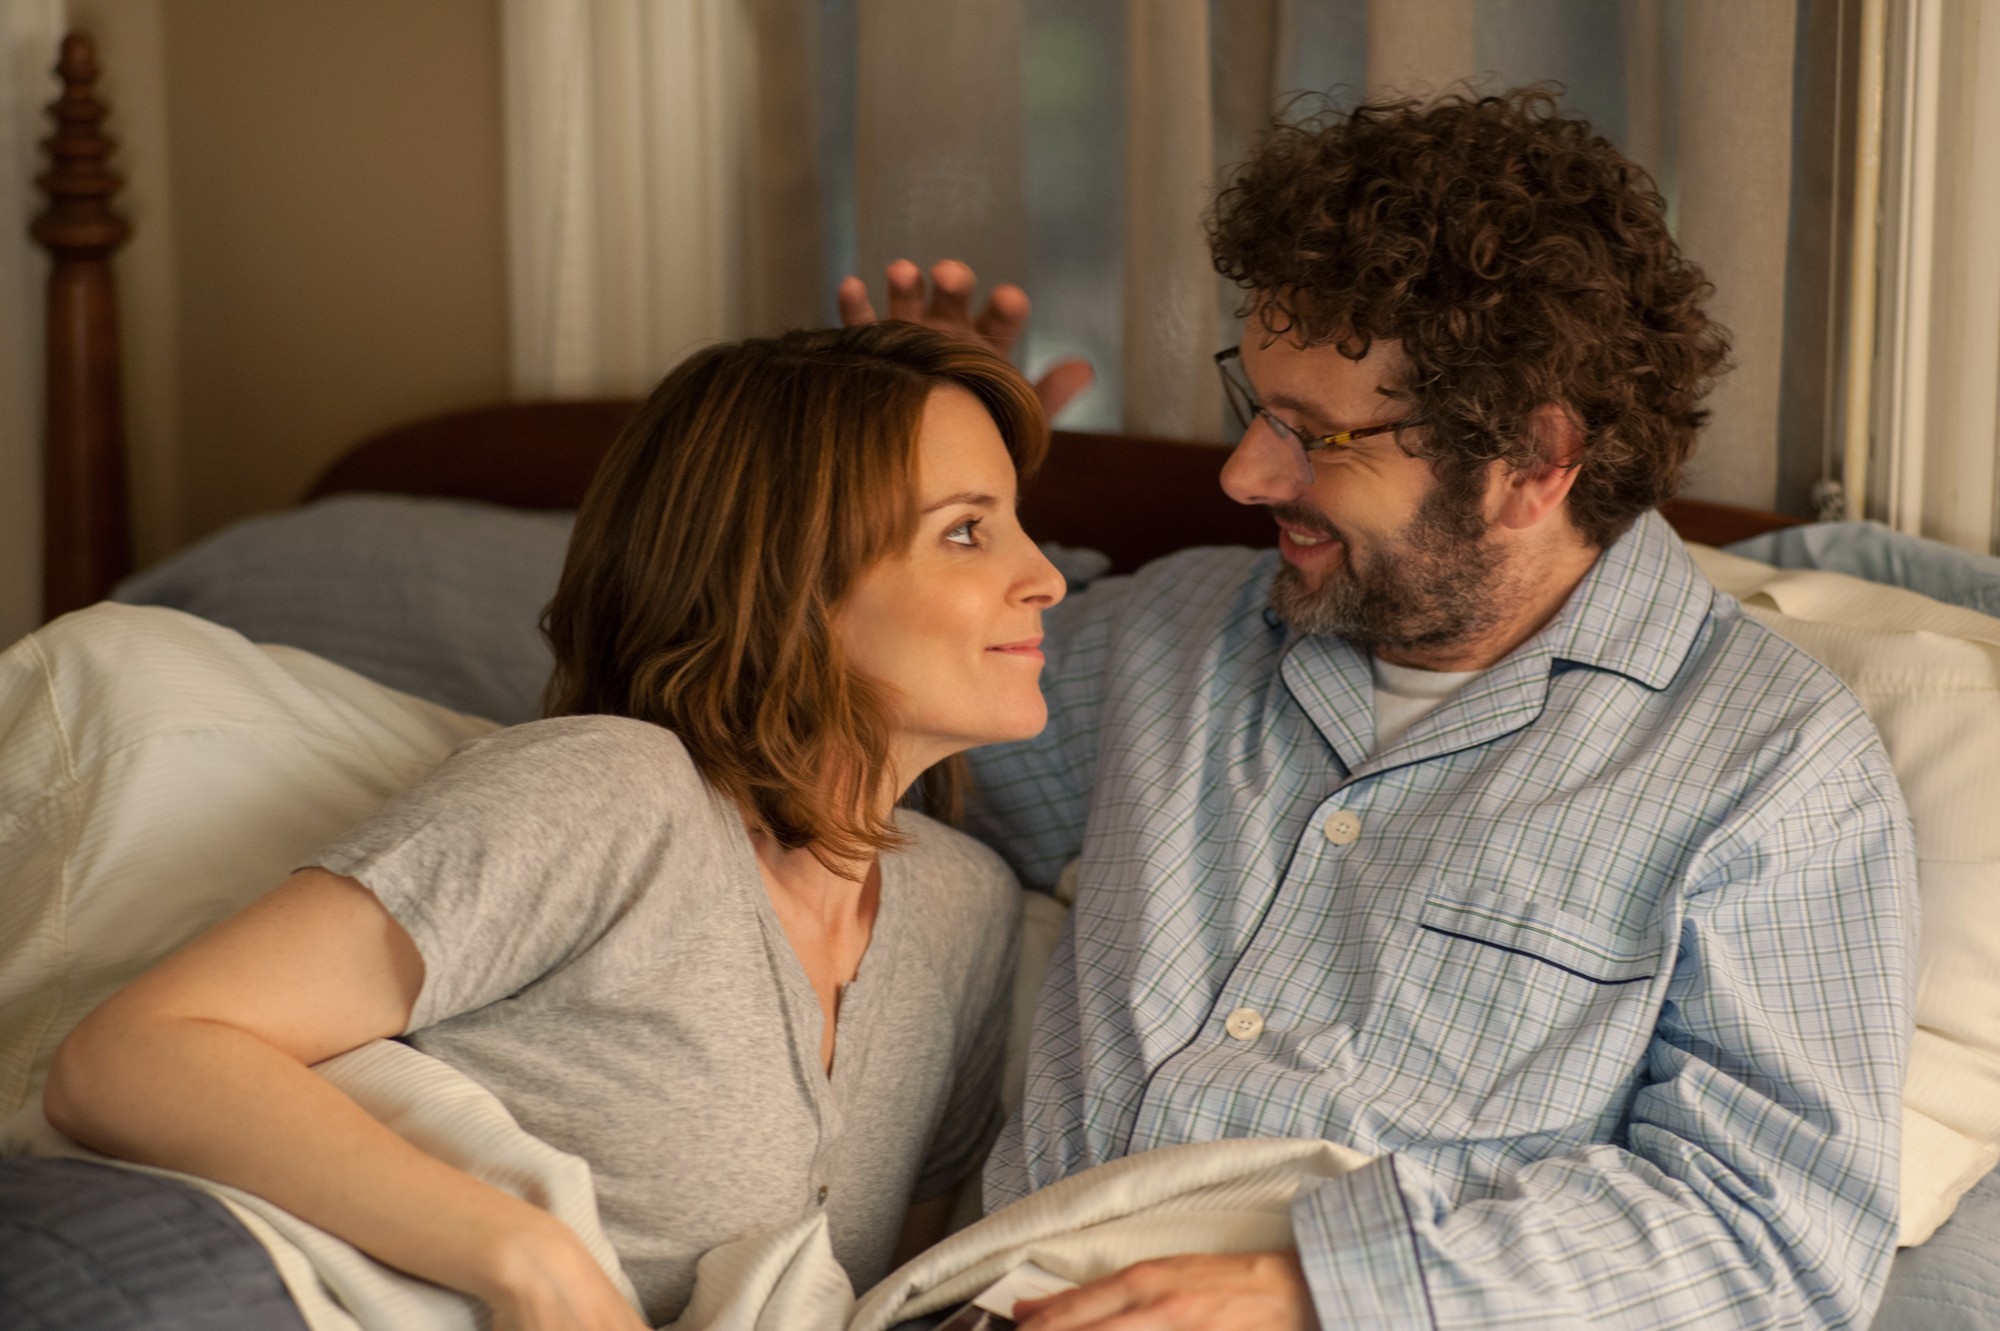 Tina Fey stars as Portia Nathan and Michael Sheen stars as Mark in Focus Features' Admission (2013)